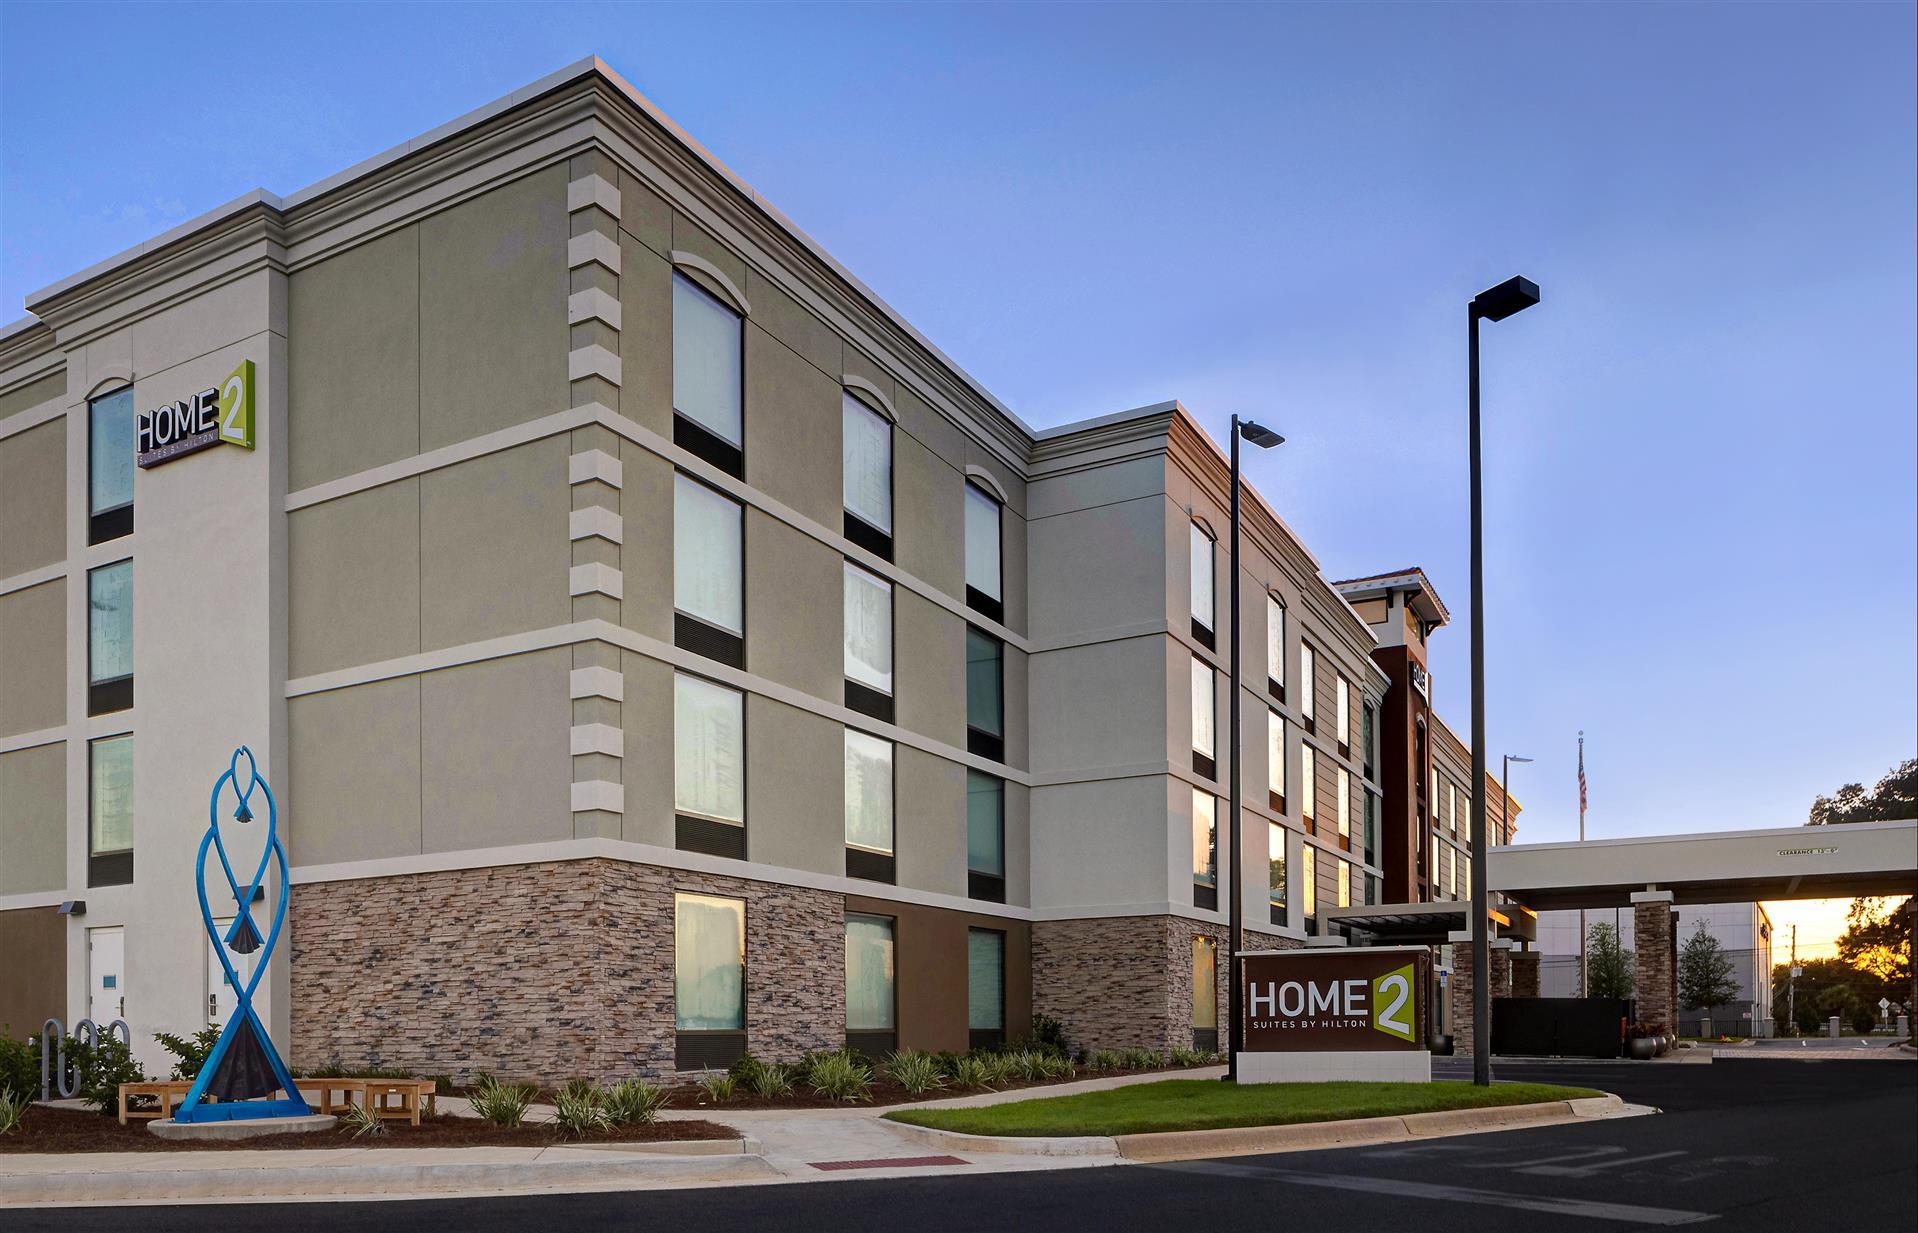 Home2 Suites by Hilton Gulf Breeze Pensacola Area in Gulf Breeze, FL